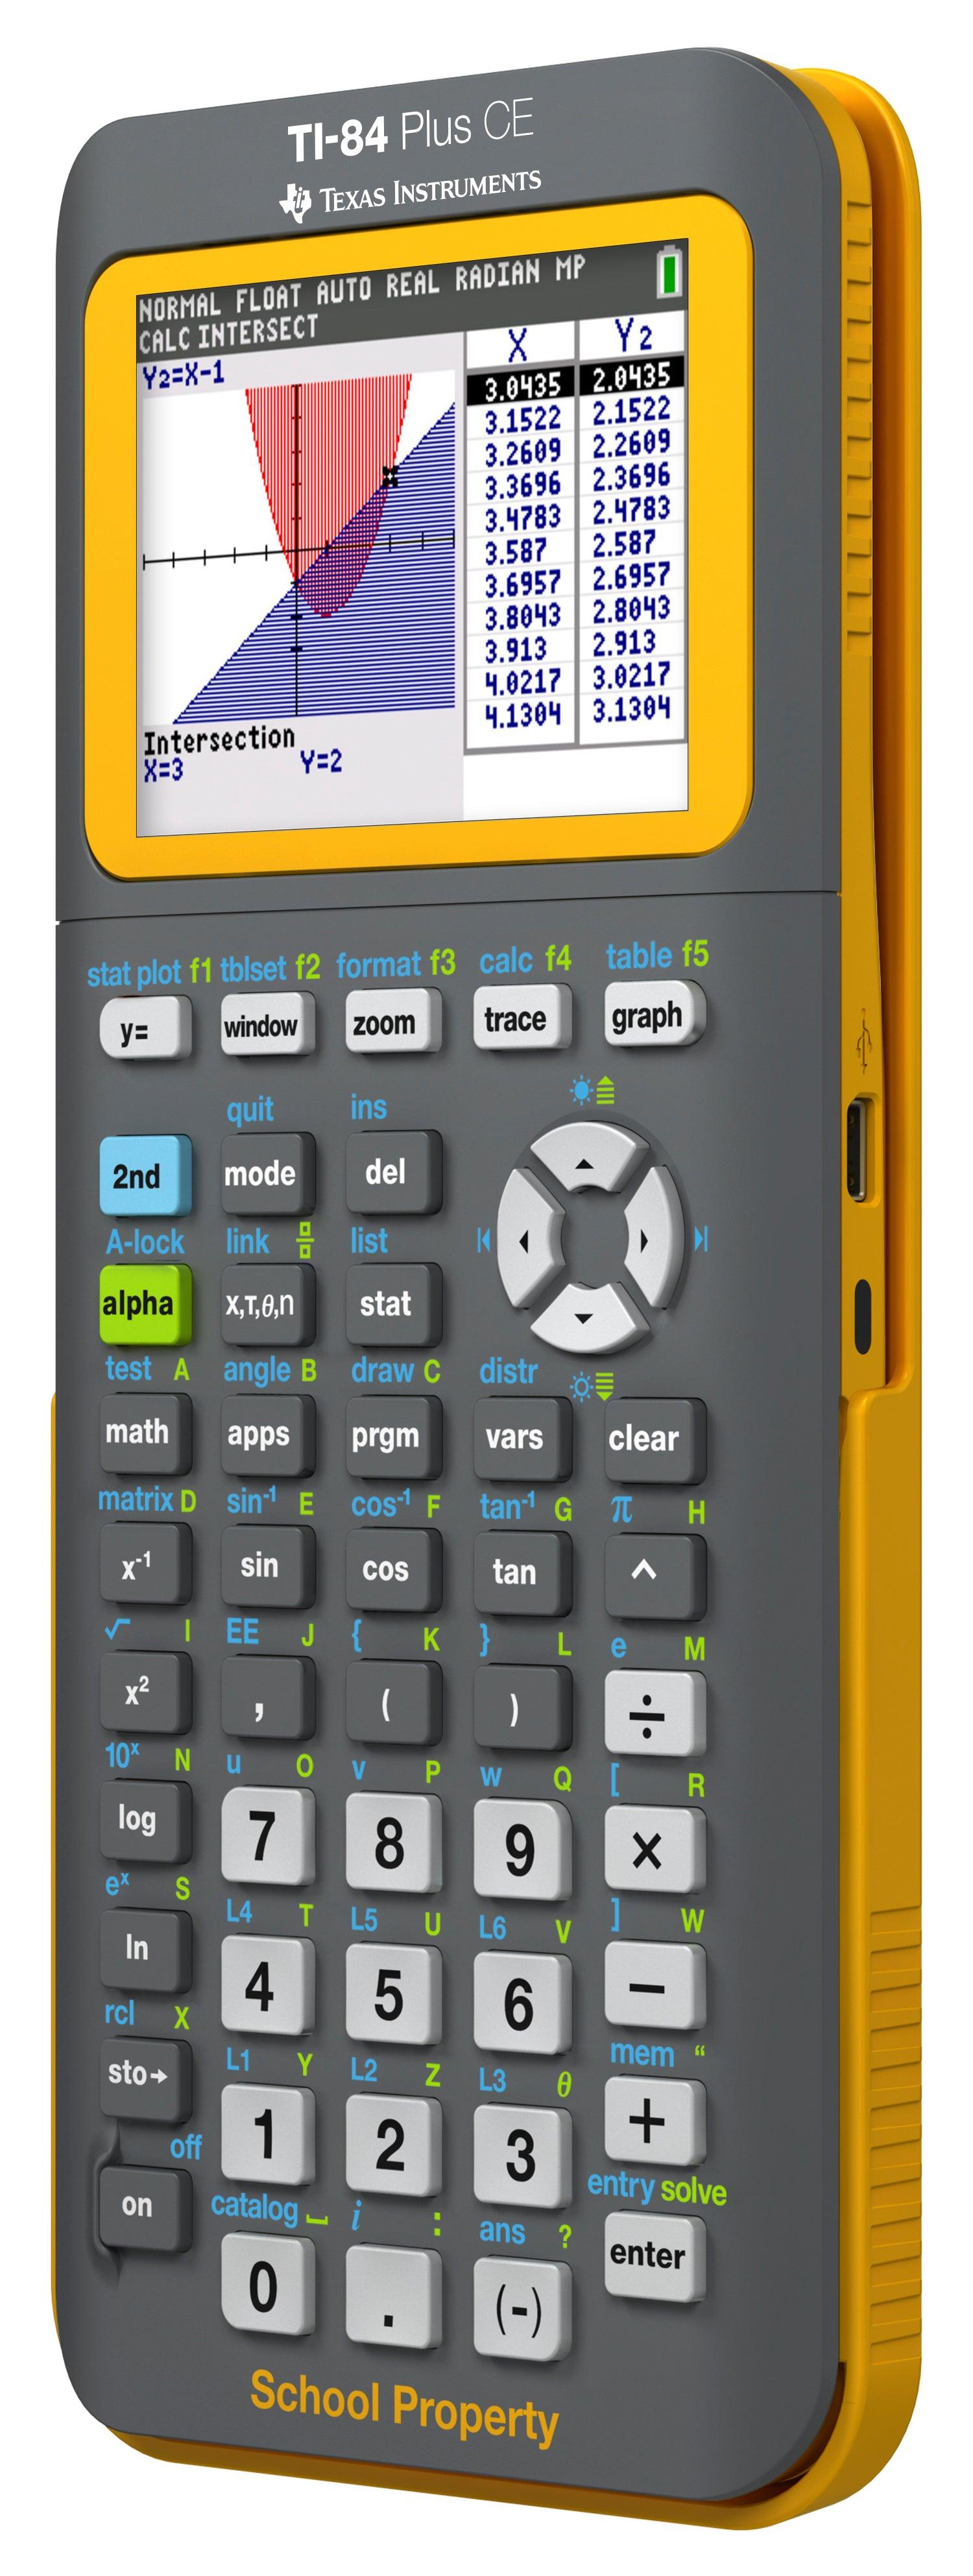 Ti-84 Plus CE Remote Learning Teacher Pack - Underwood Distributing Co.